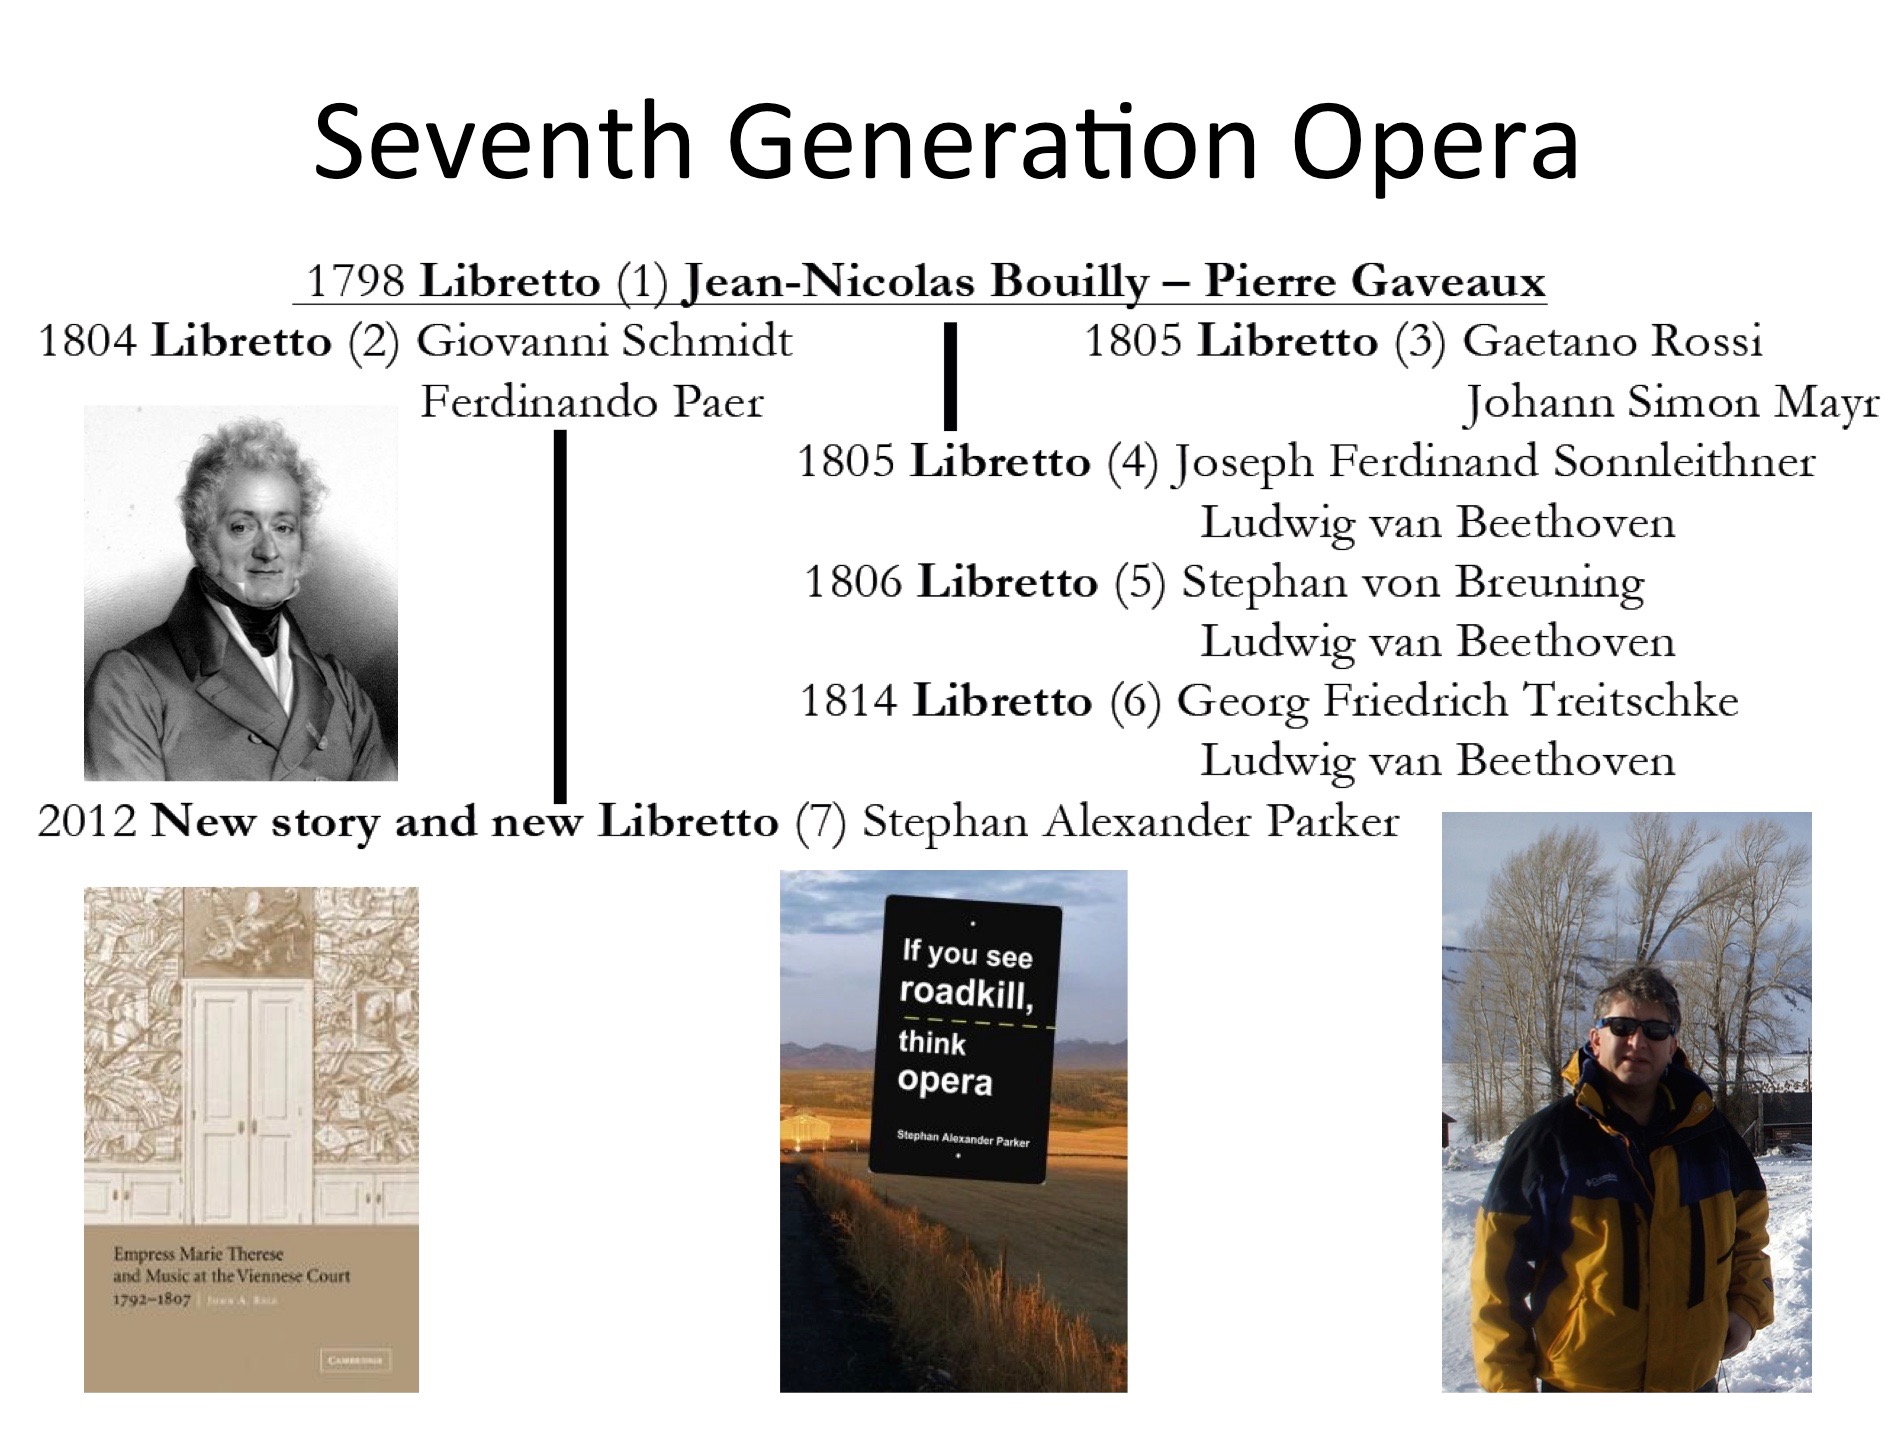 Photo titled Seventh Generation Opera shows a family tree and photos of composure Ferdinando Paer, librettist Stephan Alexander Parker, and covers of two books: Parker's If you see roadkill, think opera, and Empress Marie Therese and Music at the Viennese Court 1792-1807 by John A. Rice 